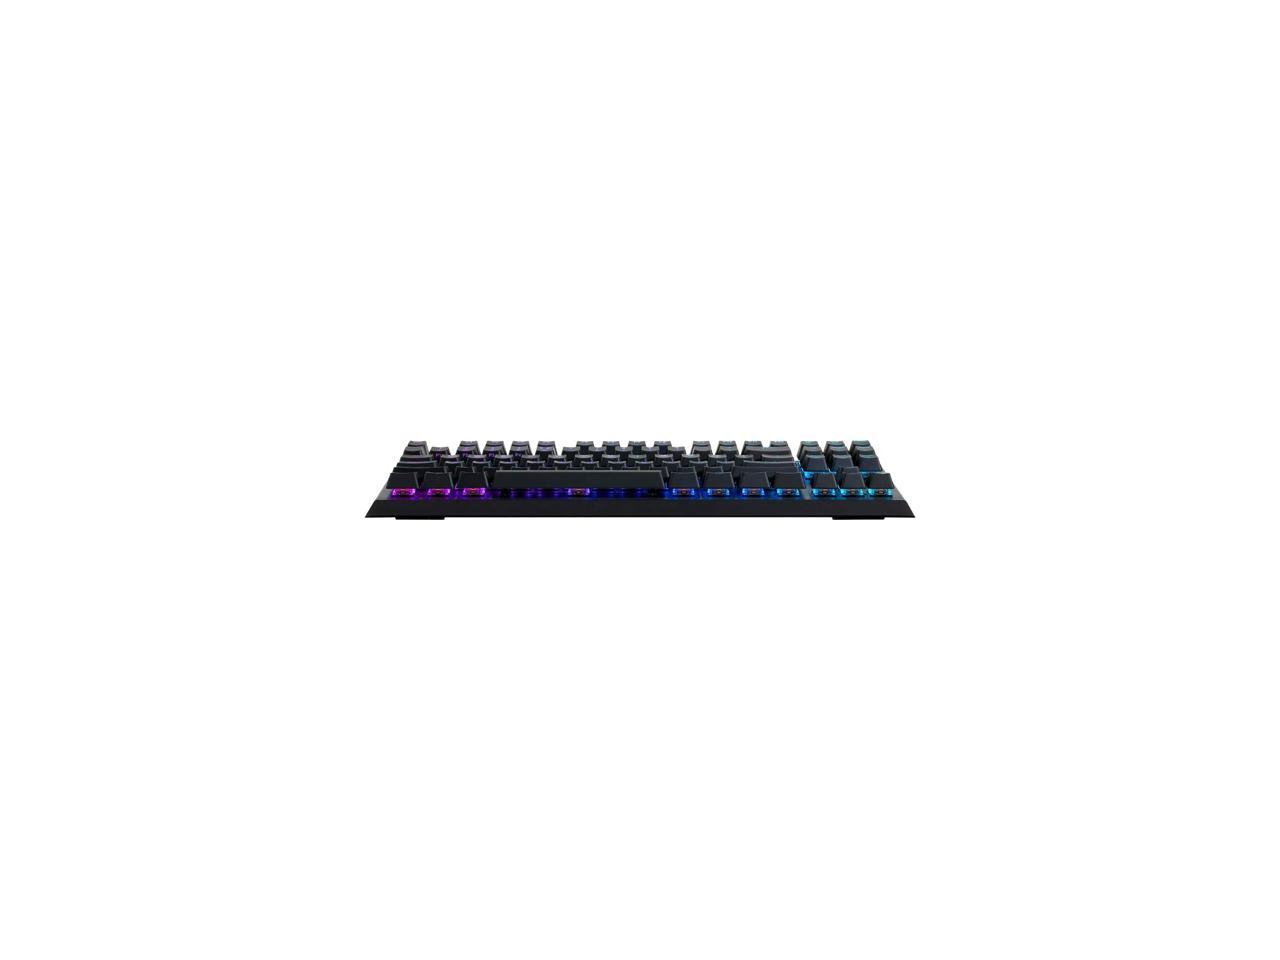 Cooler Master CK530 Tenkeyless Gaming Mechanical Keyboard with Red Switches, RGB Backlighting, On-the-Fly Controls, and Aluminum Top Plate